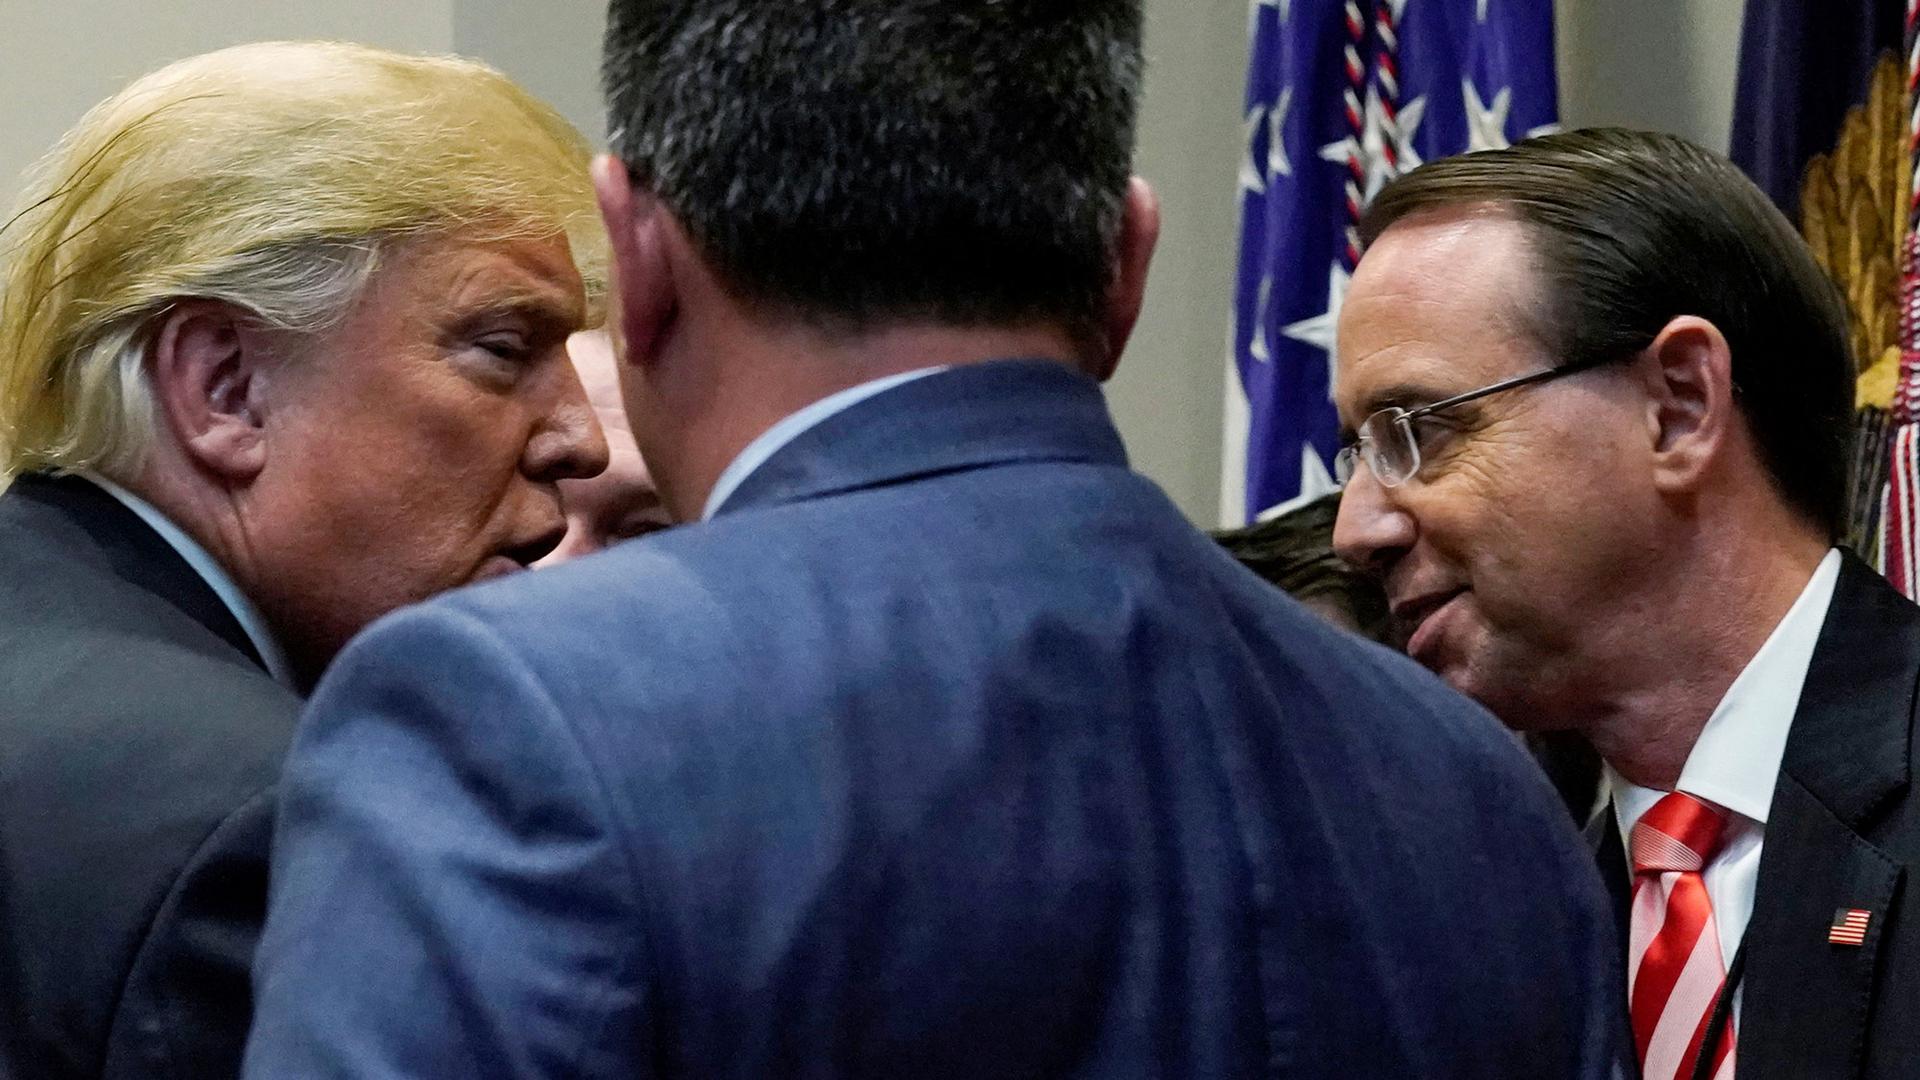 President Donald Trump is shown in this profile photography greeting Deputy US Attorney General Rod Rosenstein with flags in the background.